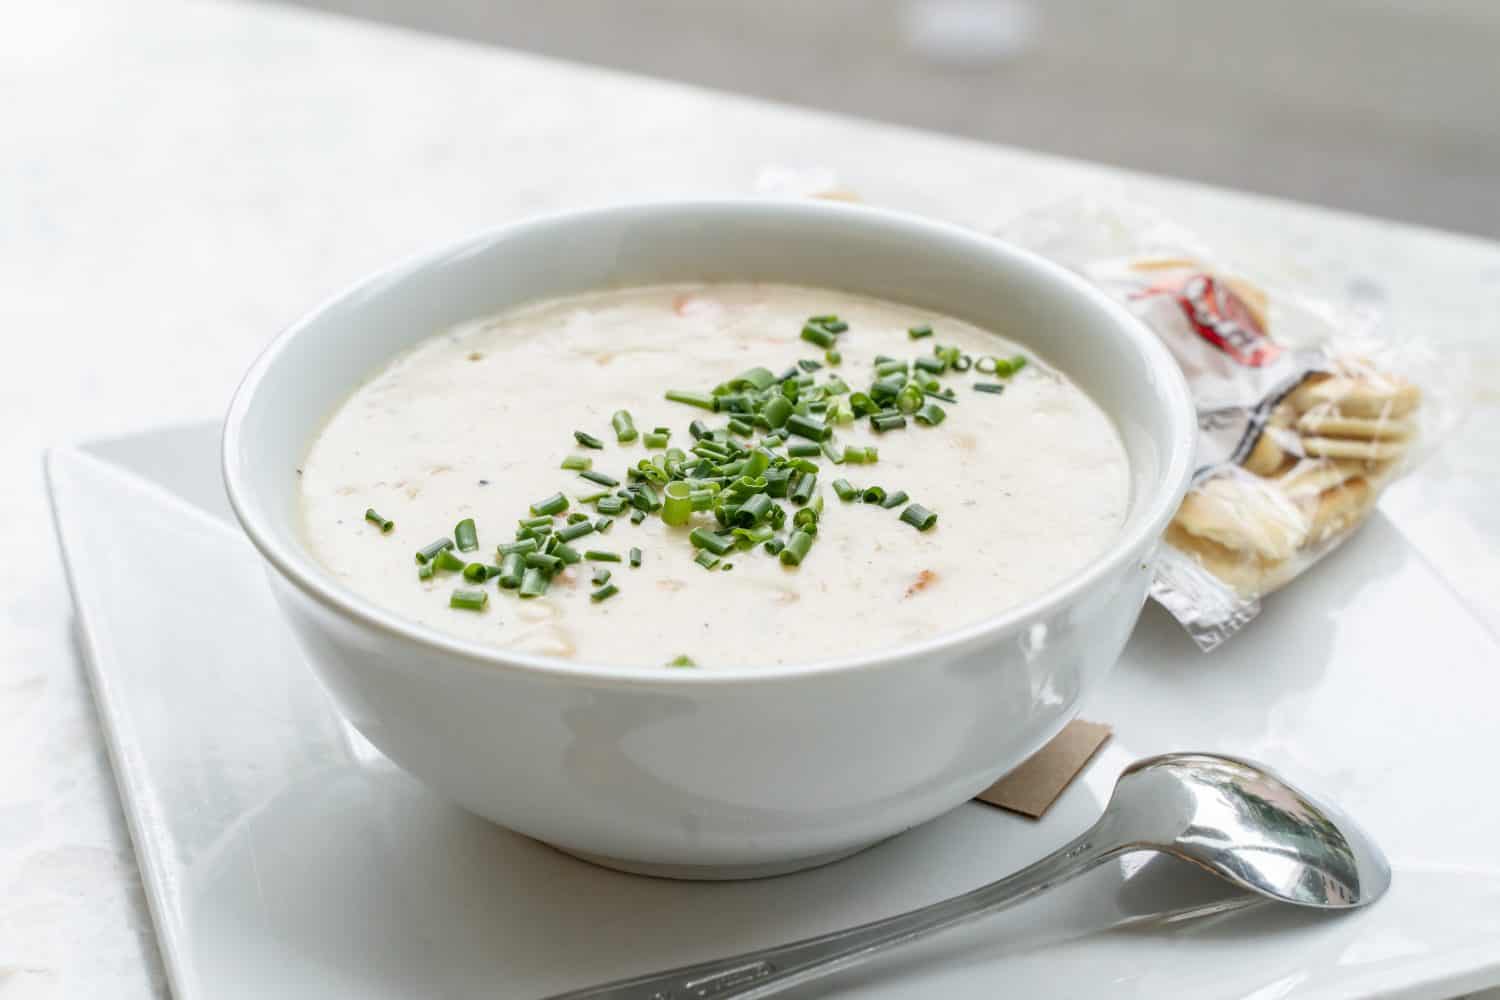 Stock photo of a creamy and hot clam chowder served in a restaurant on a cold day.